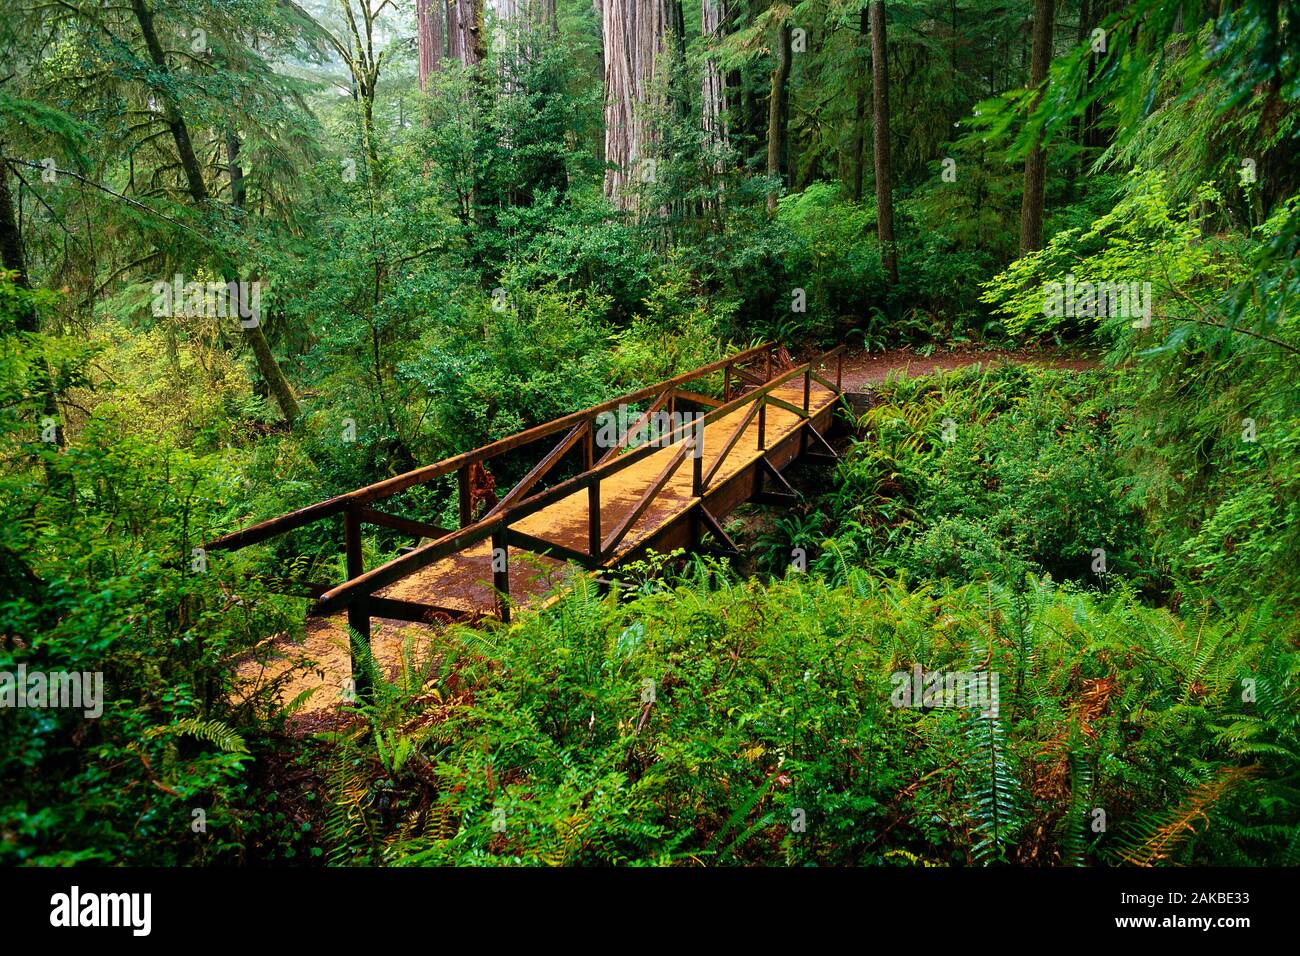 Landscape with footbridge in lush green forest, Jedediah Smith Redwoods State Park, California, USA Stock Photo